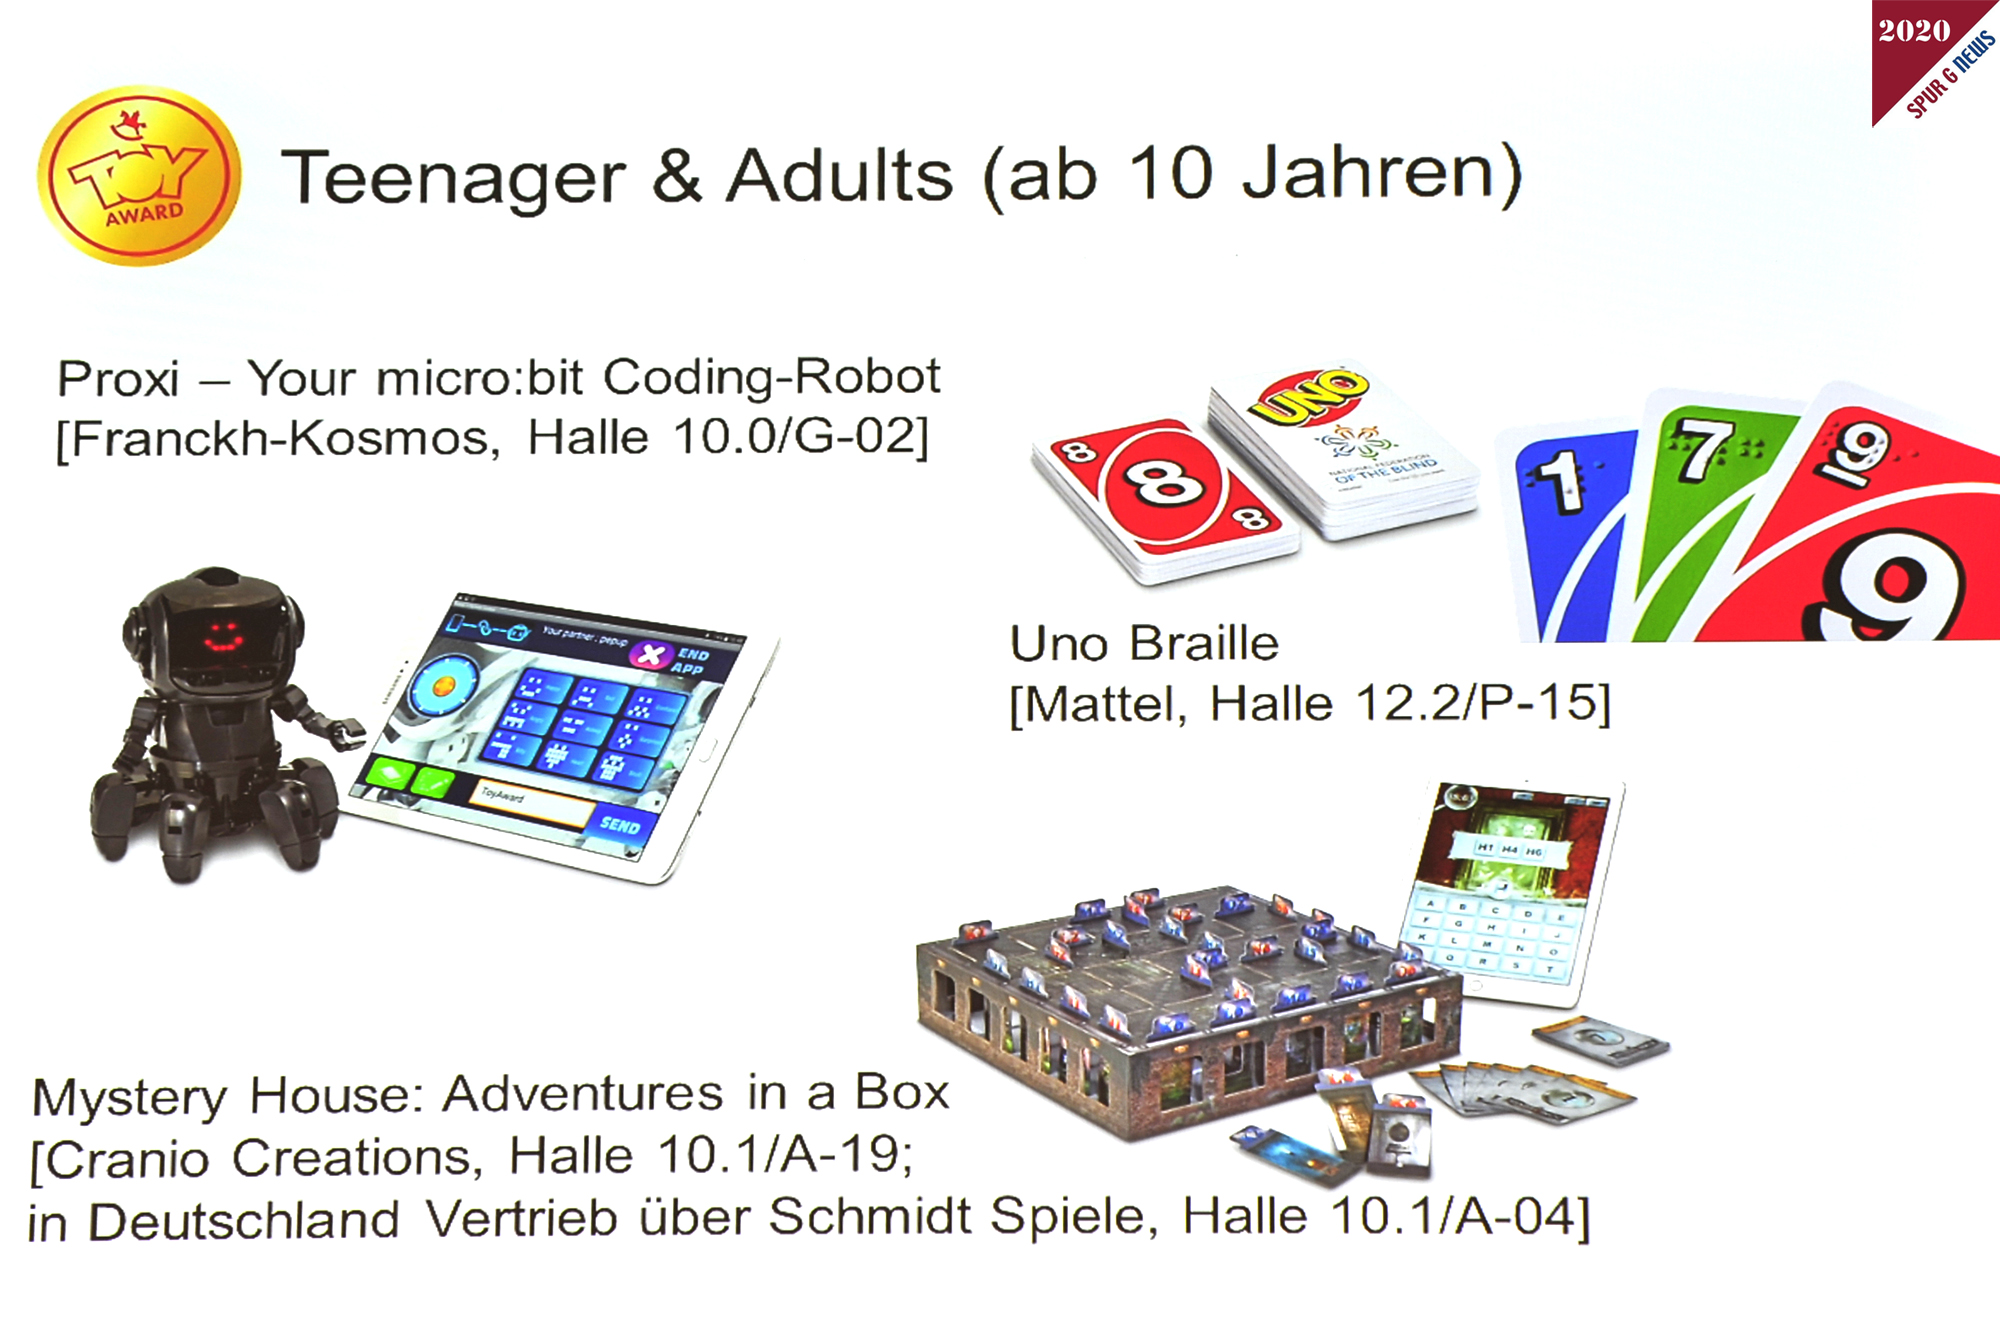 Toy Award 2020, Teenager & Adults ab 10 Jahren, Proxi-Your Micro:bit Coding Robot, Uni Braille, Mystery House: Adventures in a Box